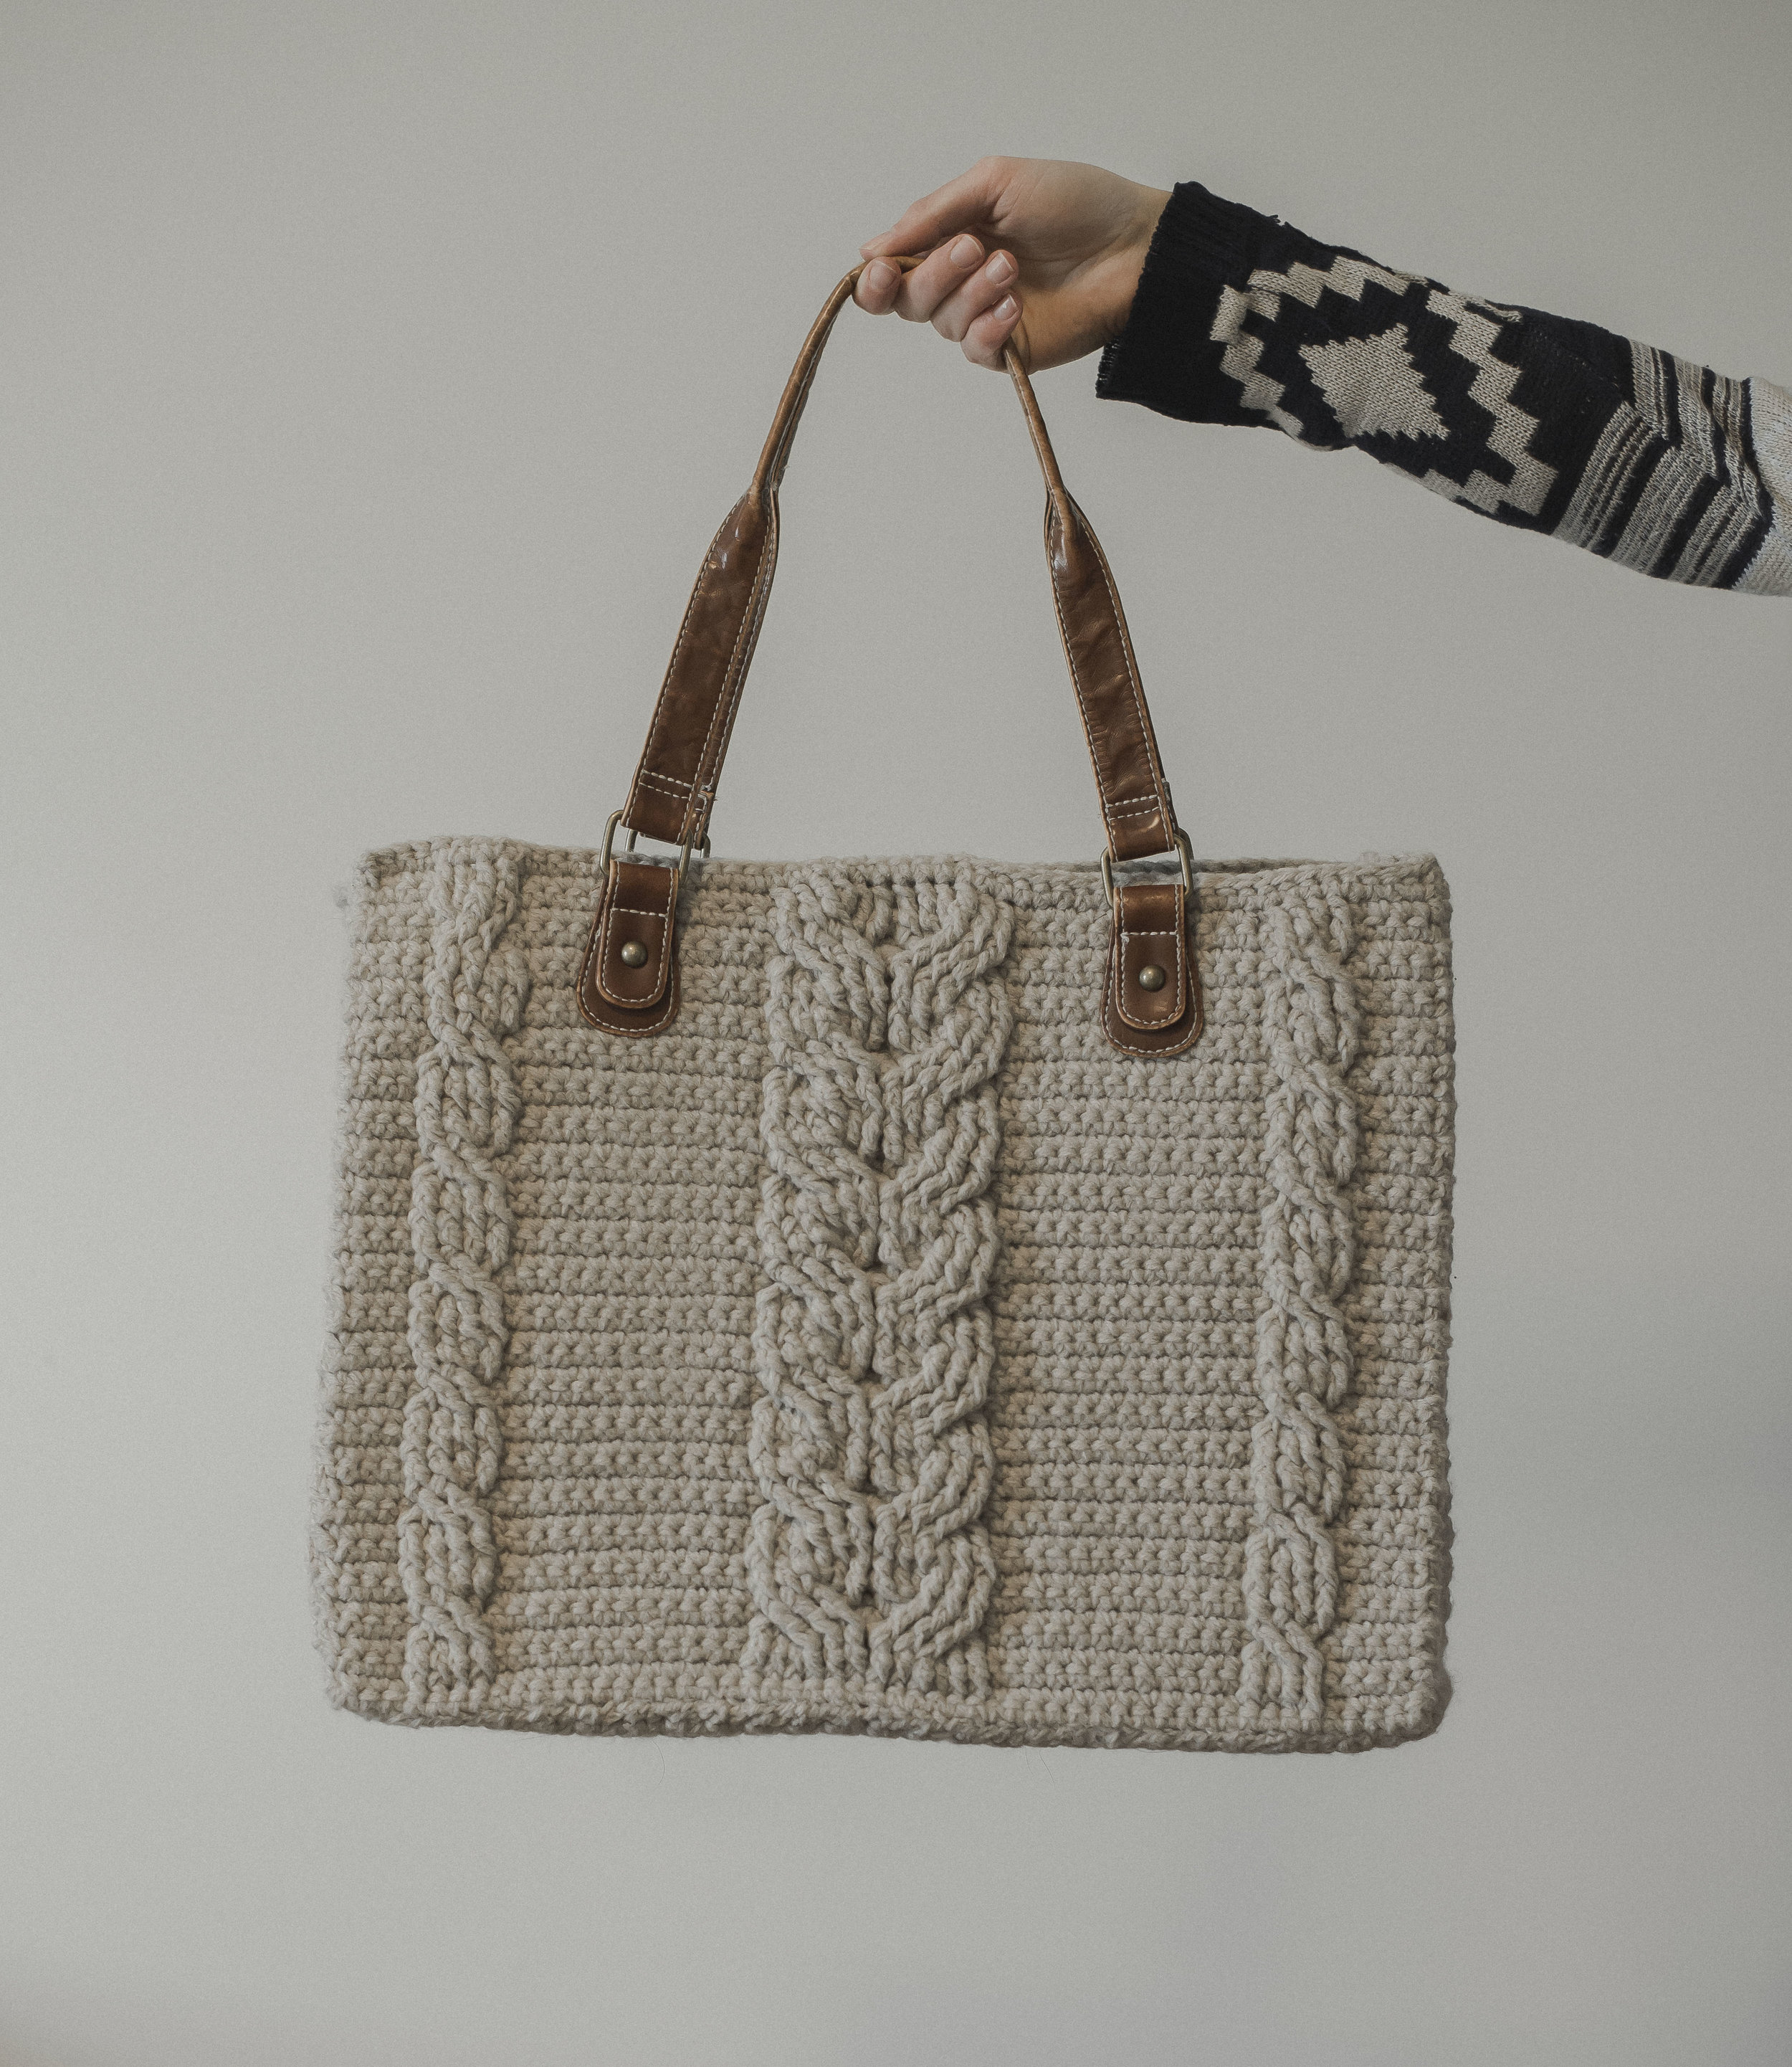 Crochet Pattern - Ladies Braided Cables Tote Bag A0137